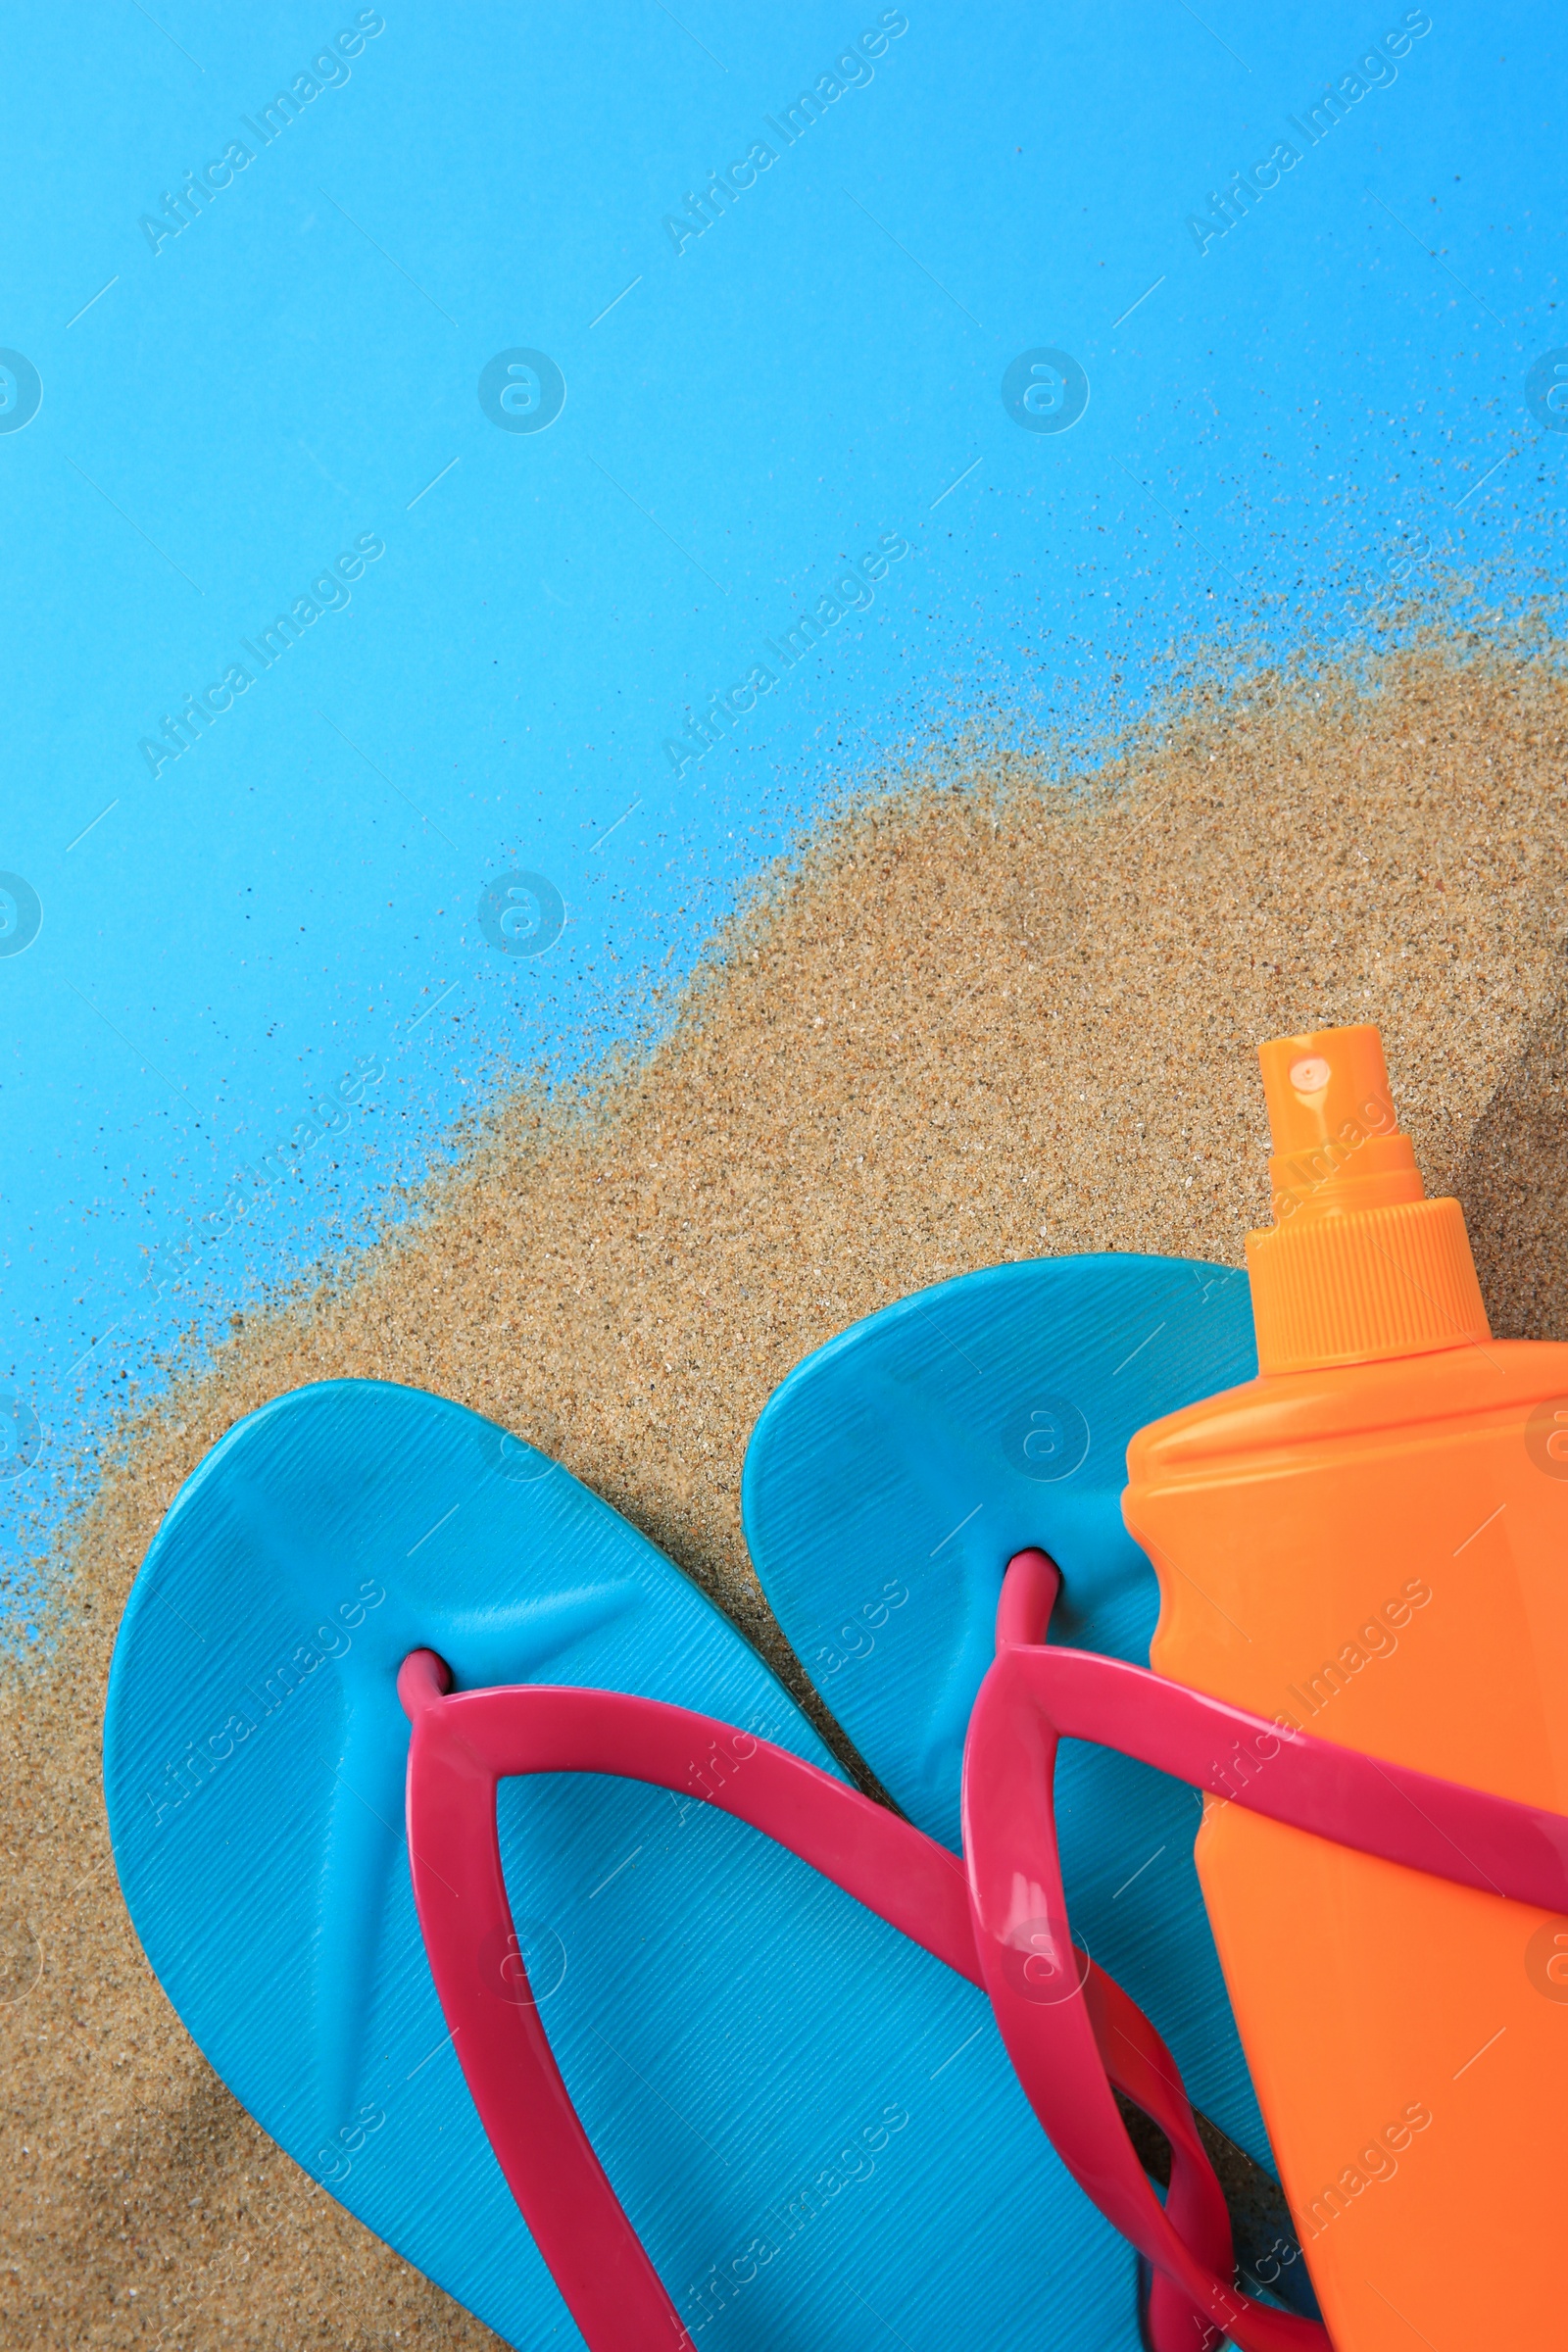 Photo of Flip flops, sunscreen and sand on light blue background, top view with space for text. Beach accessories